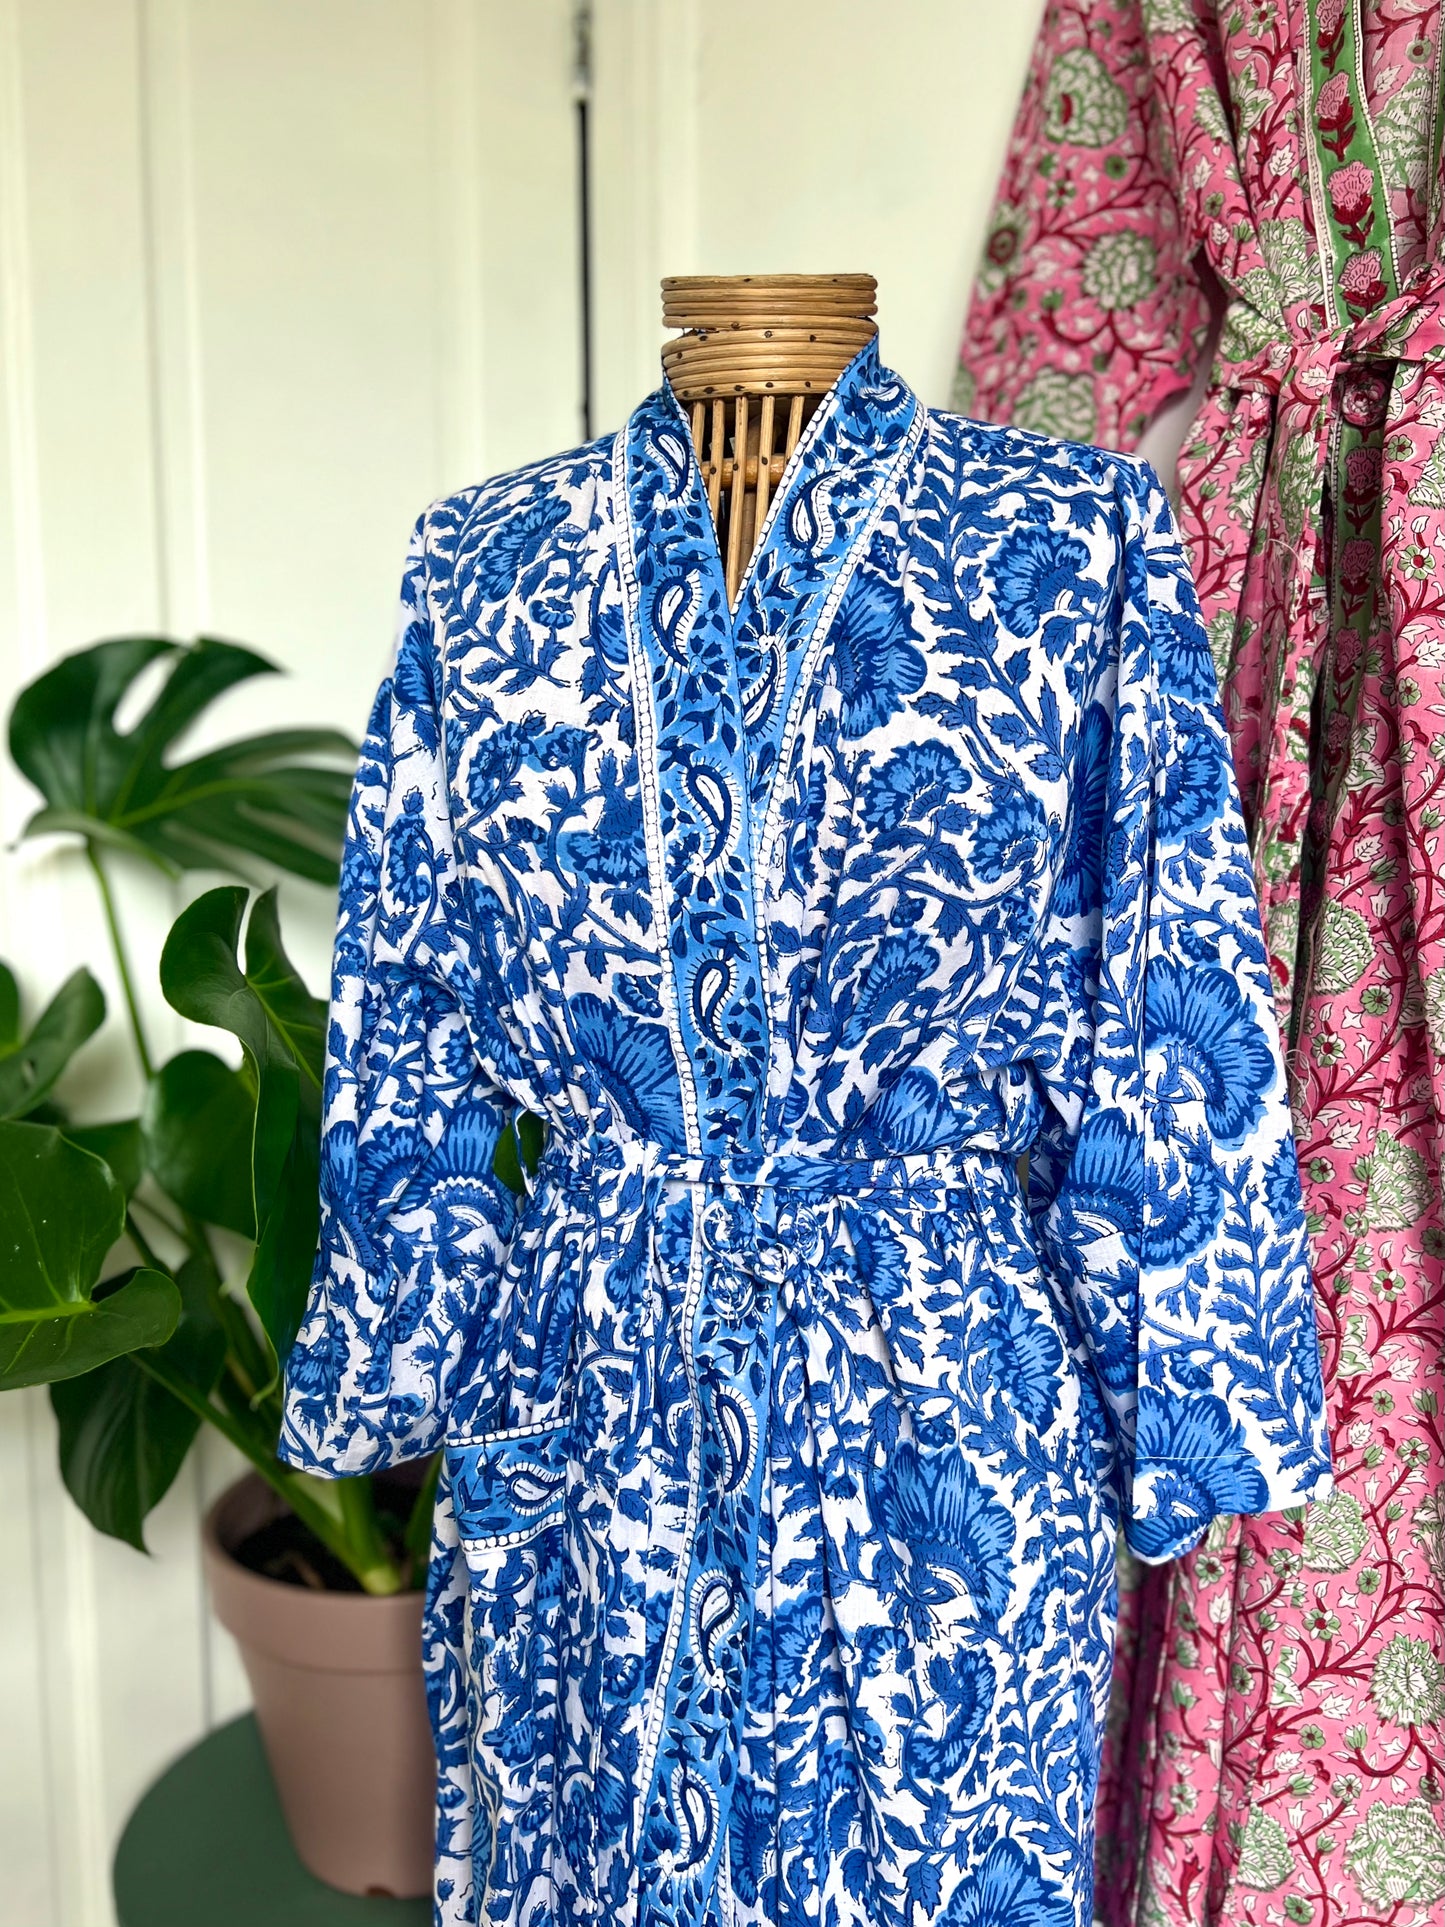 Lillian Hand Block Printed Indian Cotton Dressing Gown Robe - Blue & White Floral